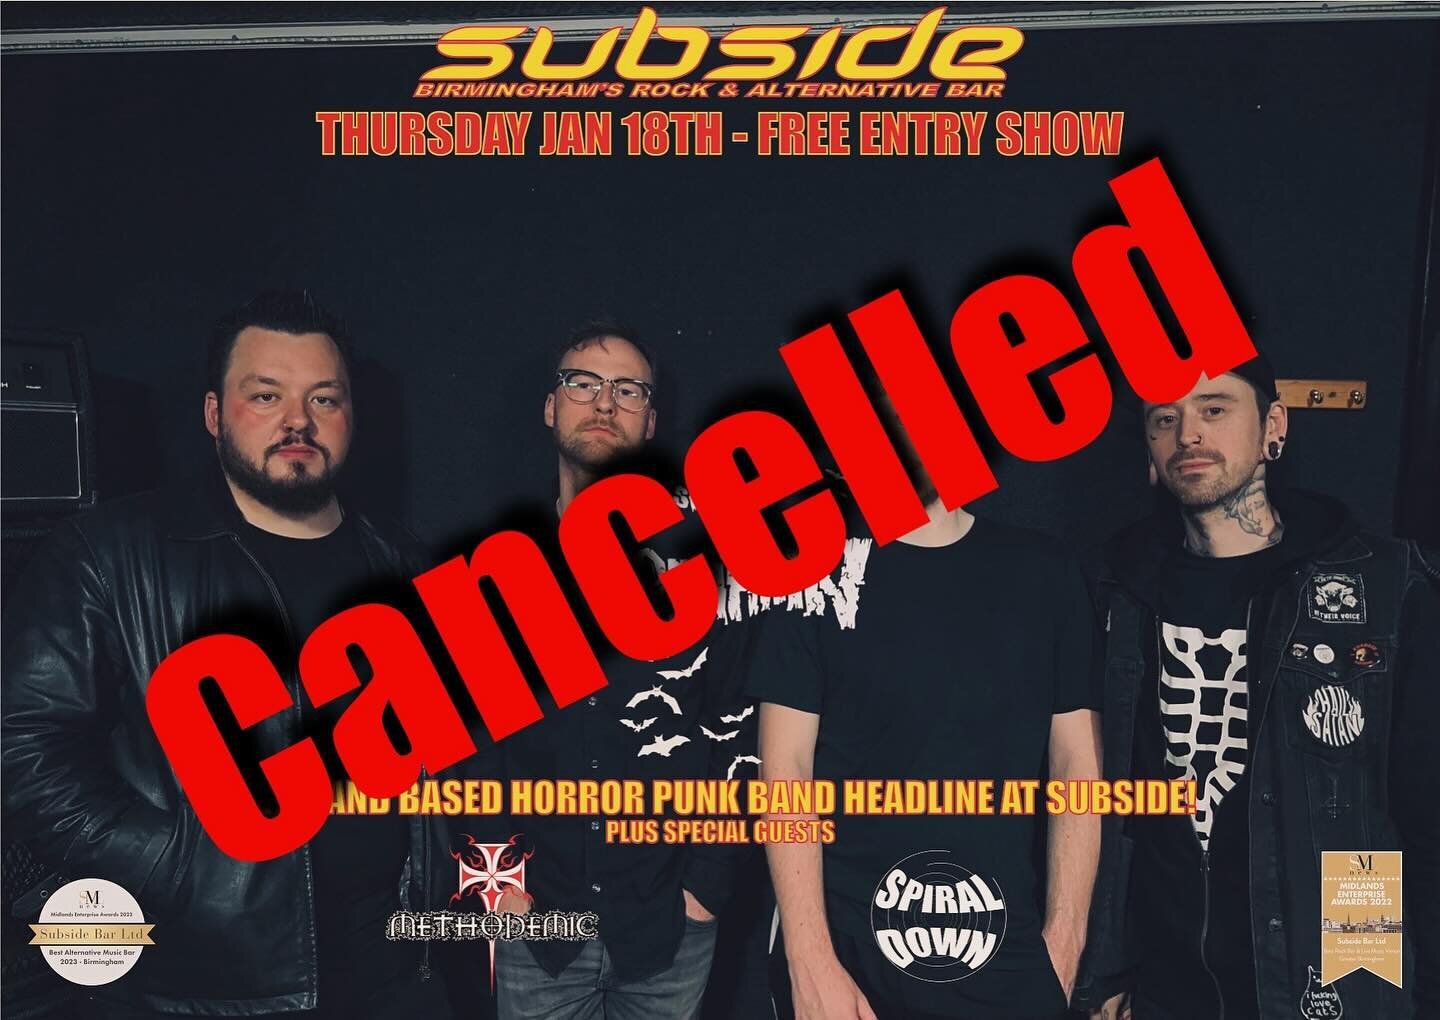 Good evening all, due to circumstance&rsquo;s that are out of our hands, our gig on 18th Jan has been cancelled. We are sorry for anyone that was going to come and see us rock the stage
-
-
-
#gig #concert #livemusic